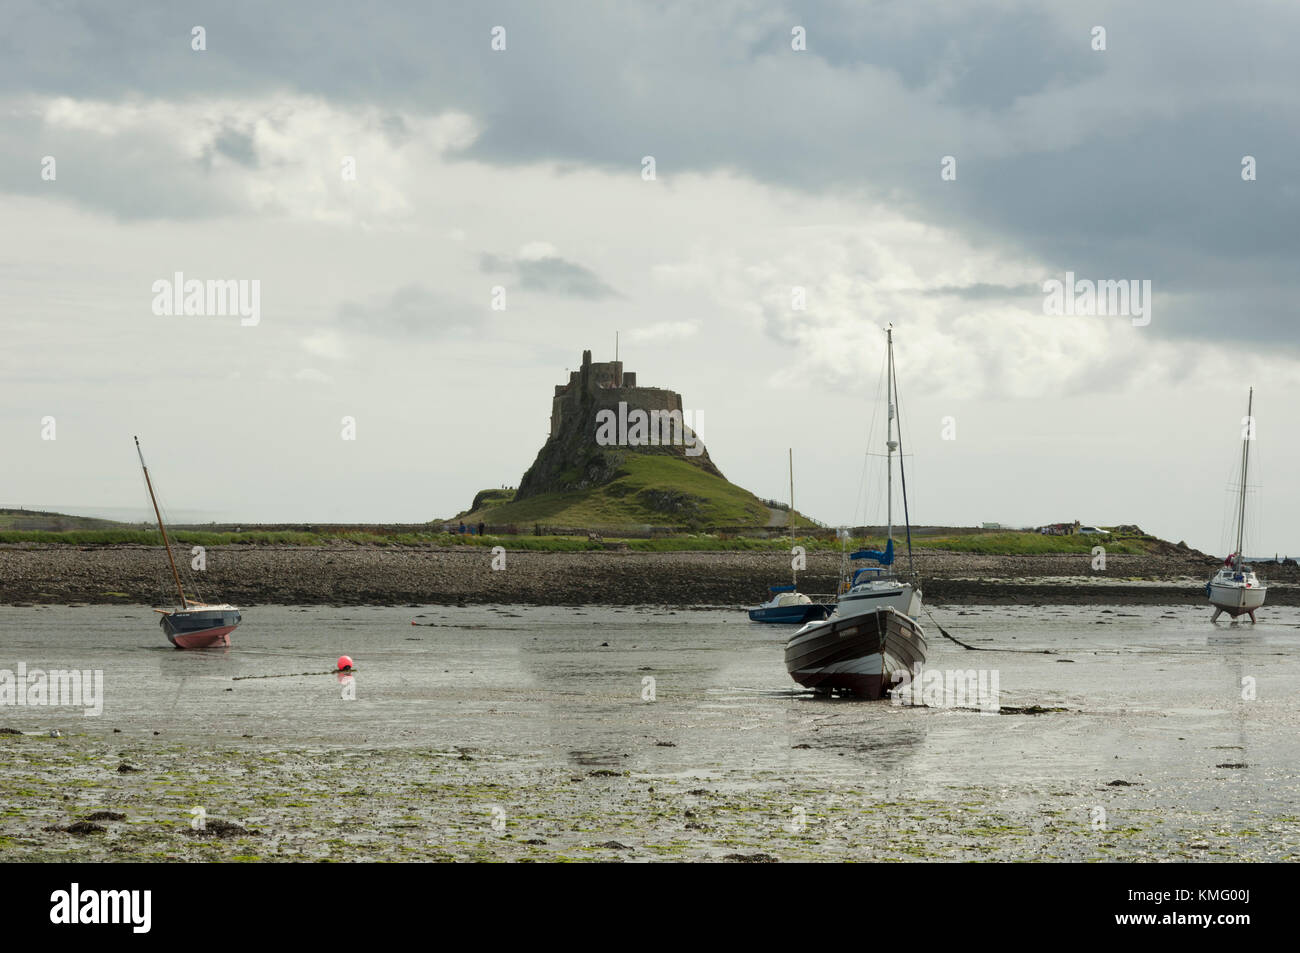 Looking to Lindisfarne Priory, at Holy Island in Northumberland on the North East coast of England, when the tide has receded. Stock Photo